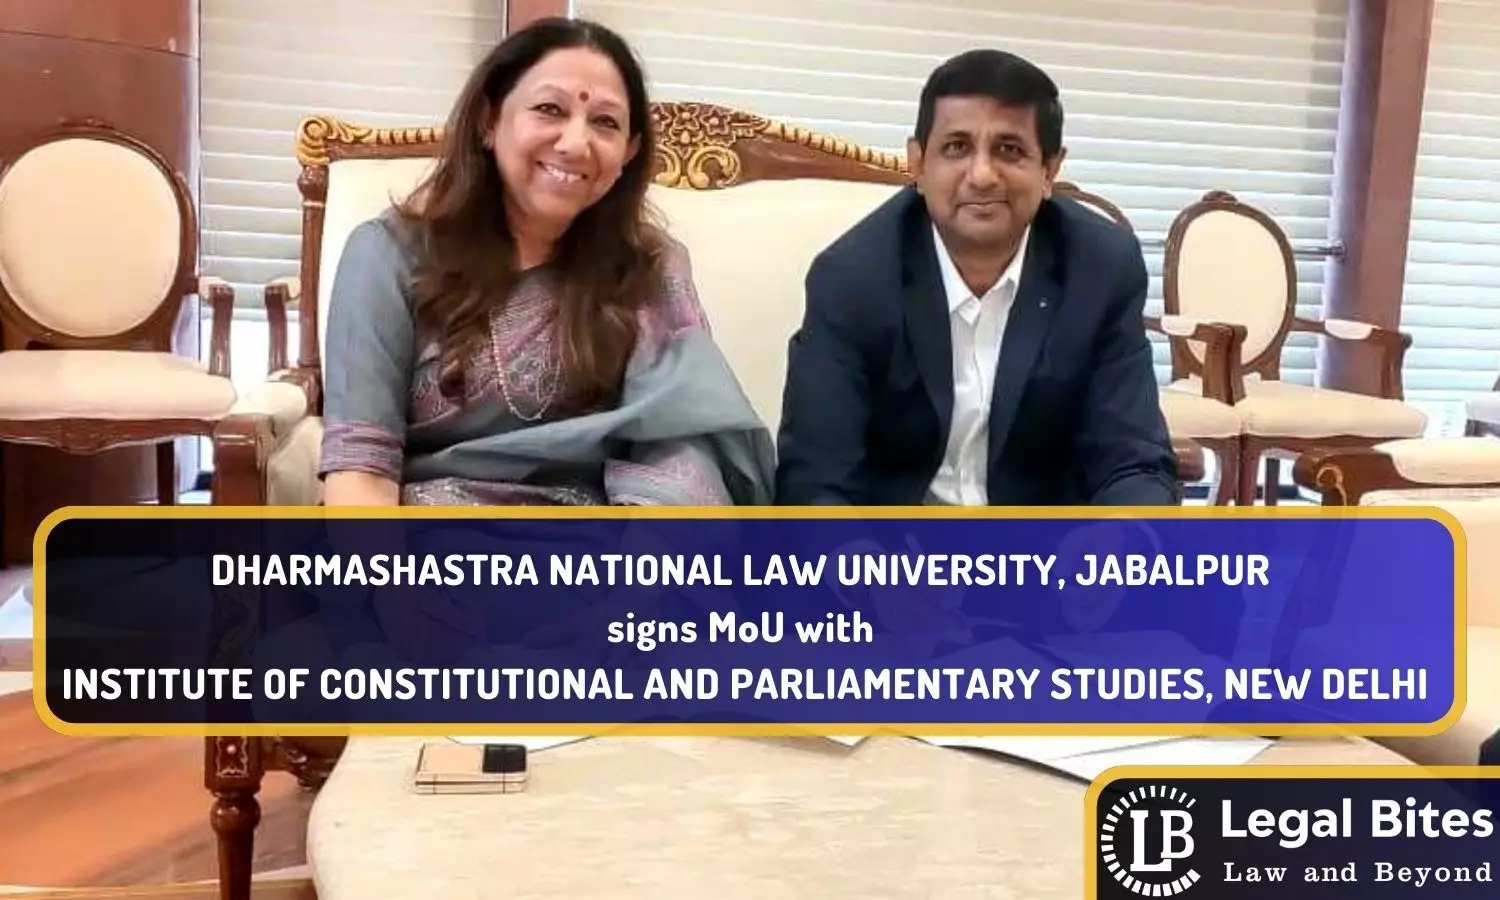 DNLU, Jabalpur inks MoU with the Institute of Constitutional and Parliamentary Studies, New Delhi